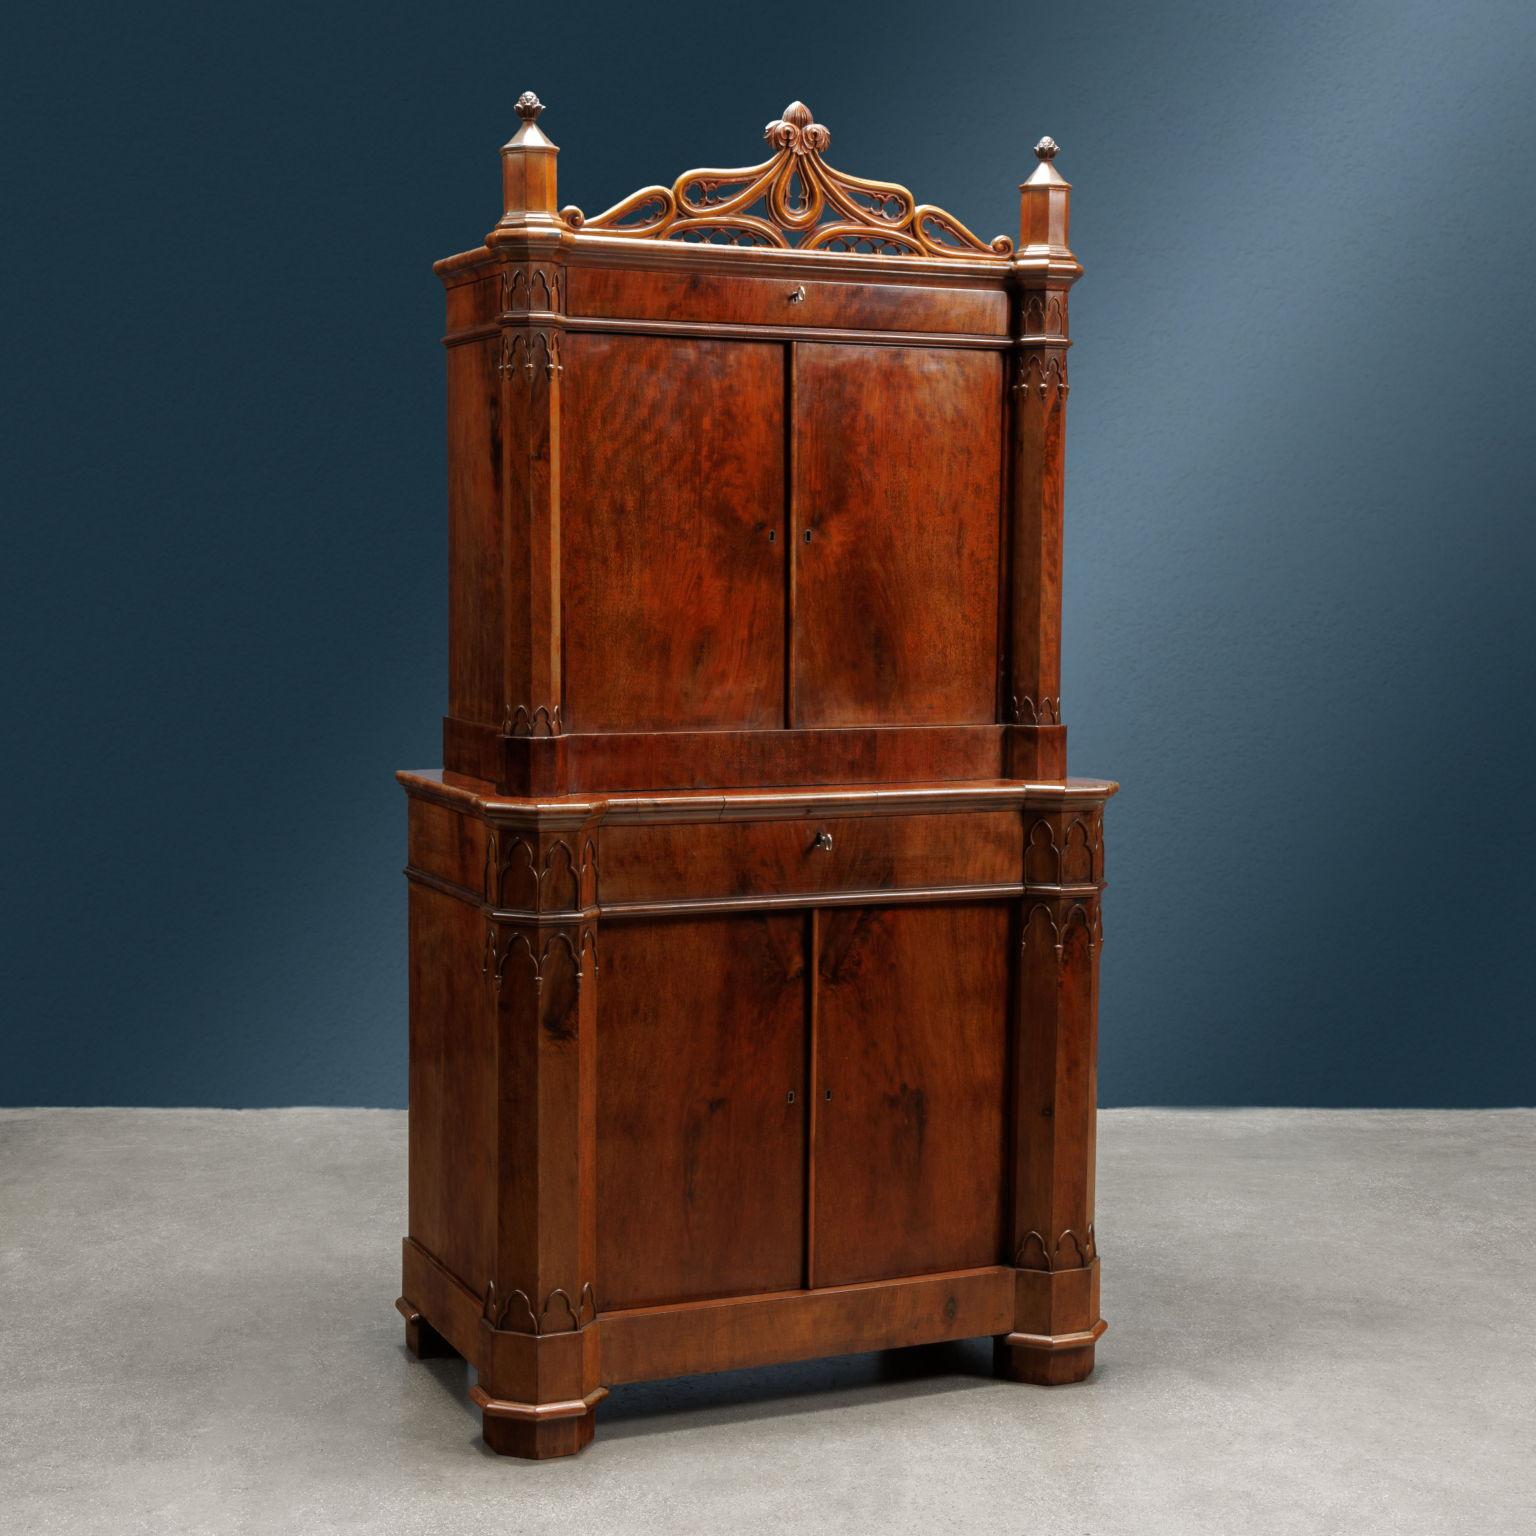 Two-body cabinet completely veneered in mahogany feather; it has both in the narrower upper part and in the lower part two doors surmounted by a drawer and framed by a pair of uprights with an octagonal base. 

The mullions are embellished with